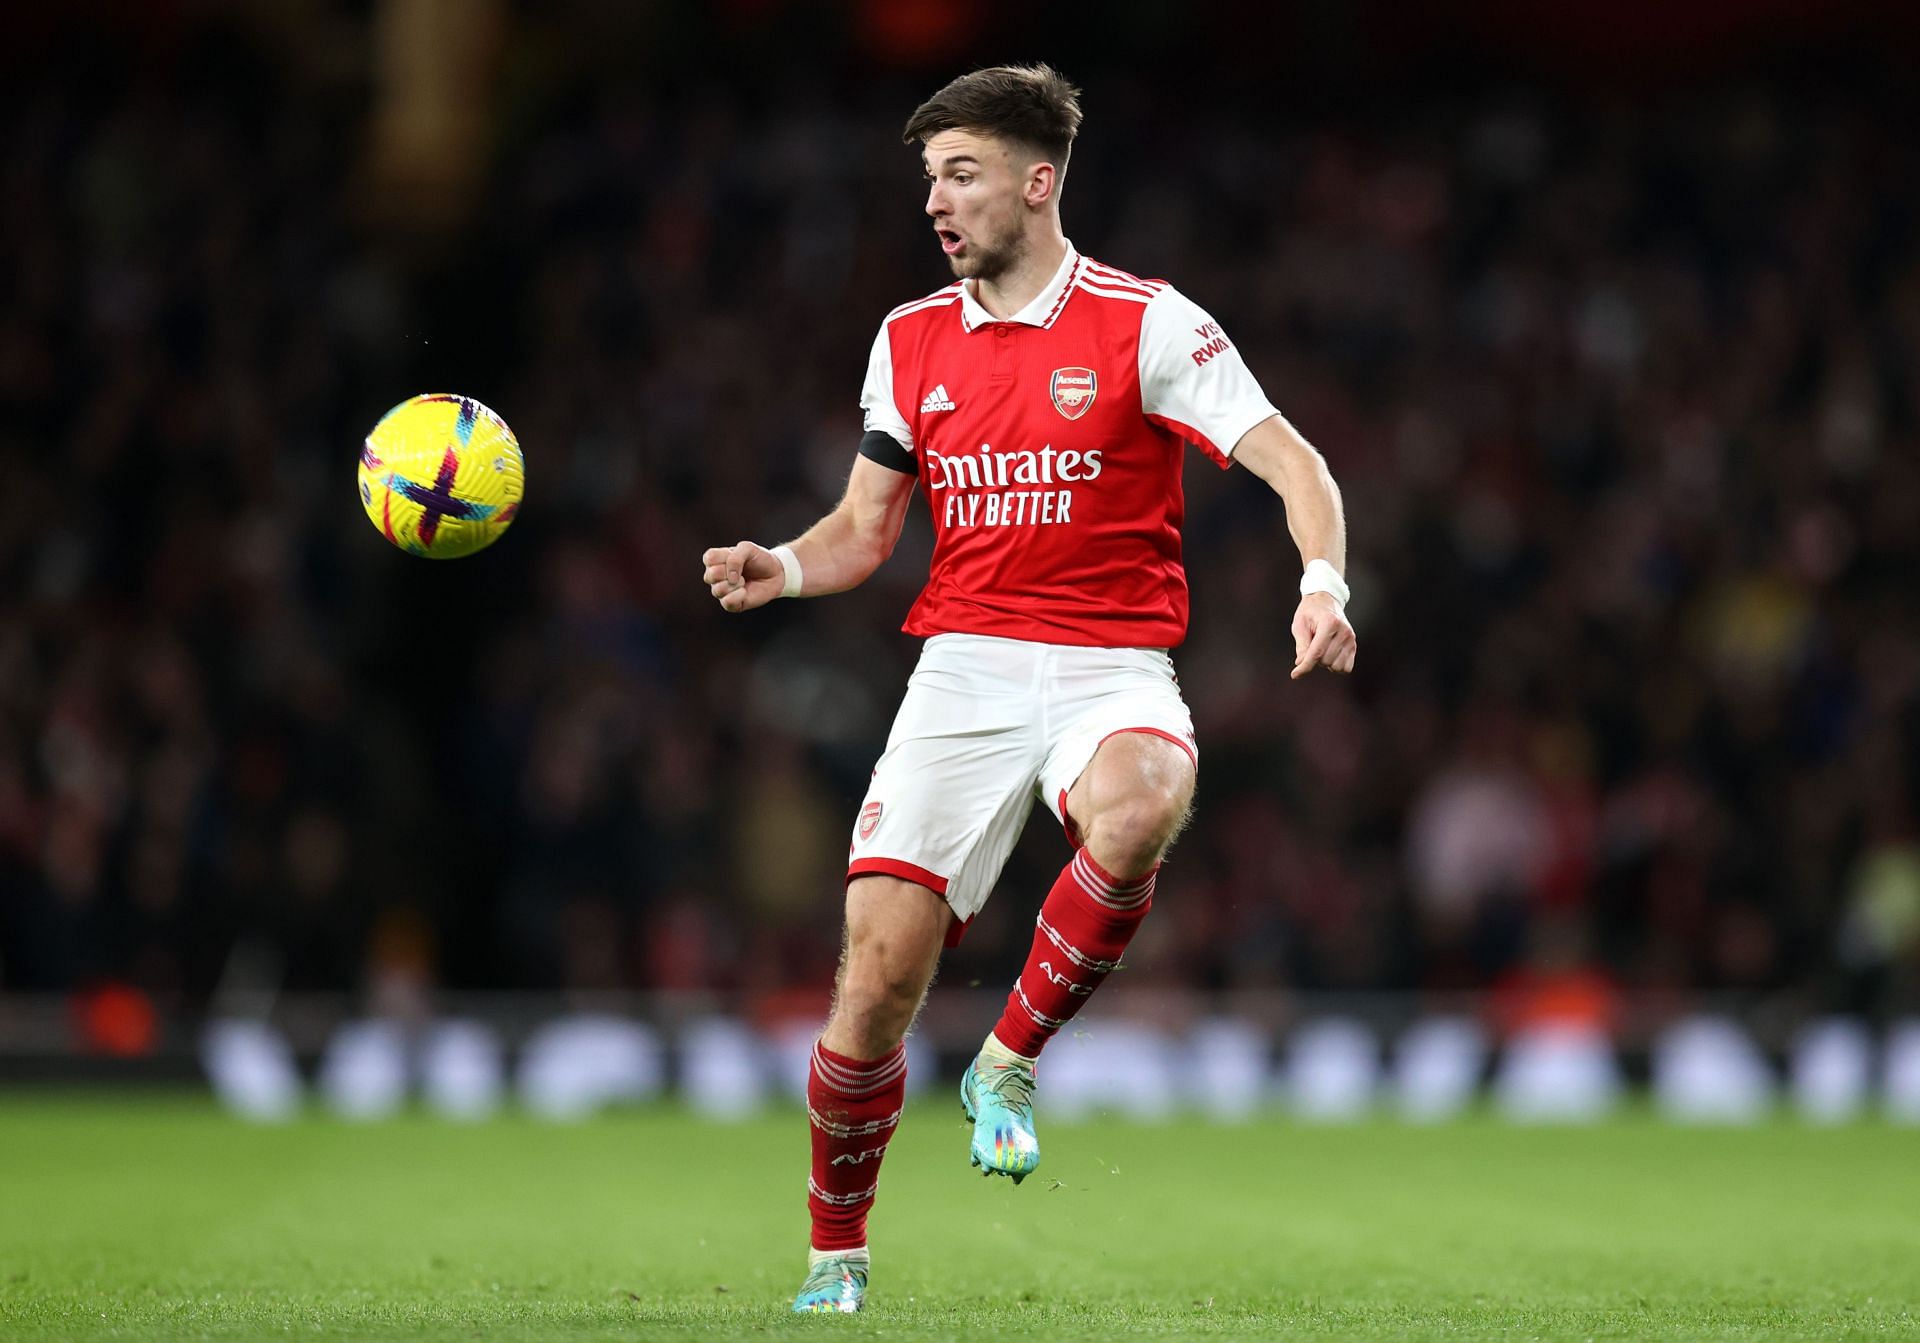 Kieran Tierney in action for the Gunners.